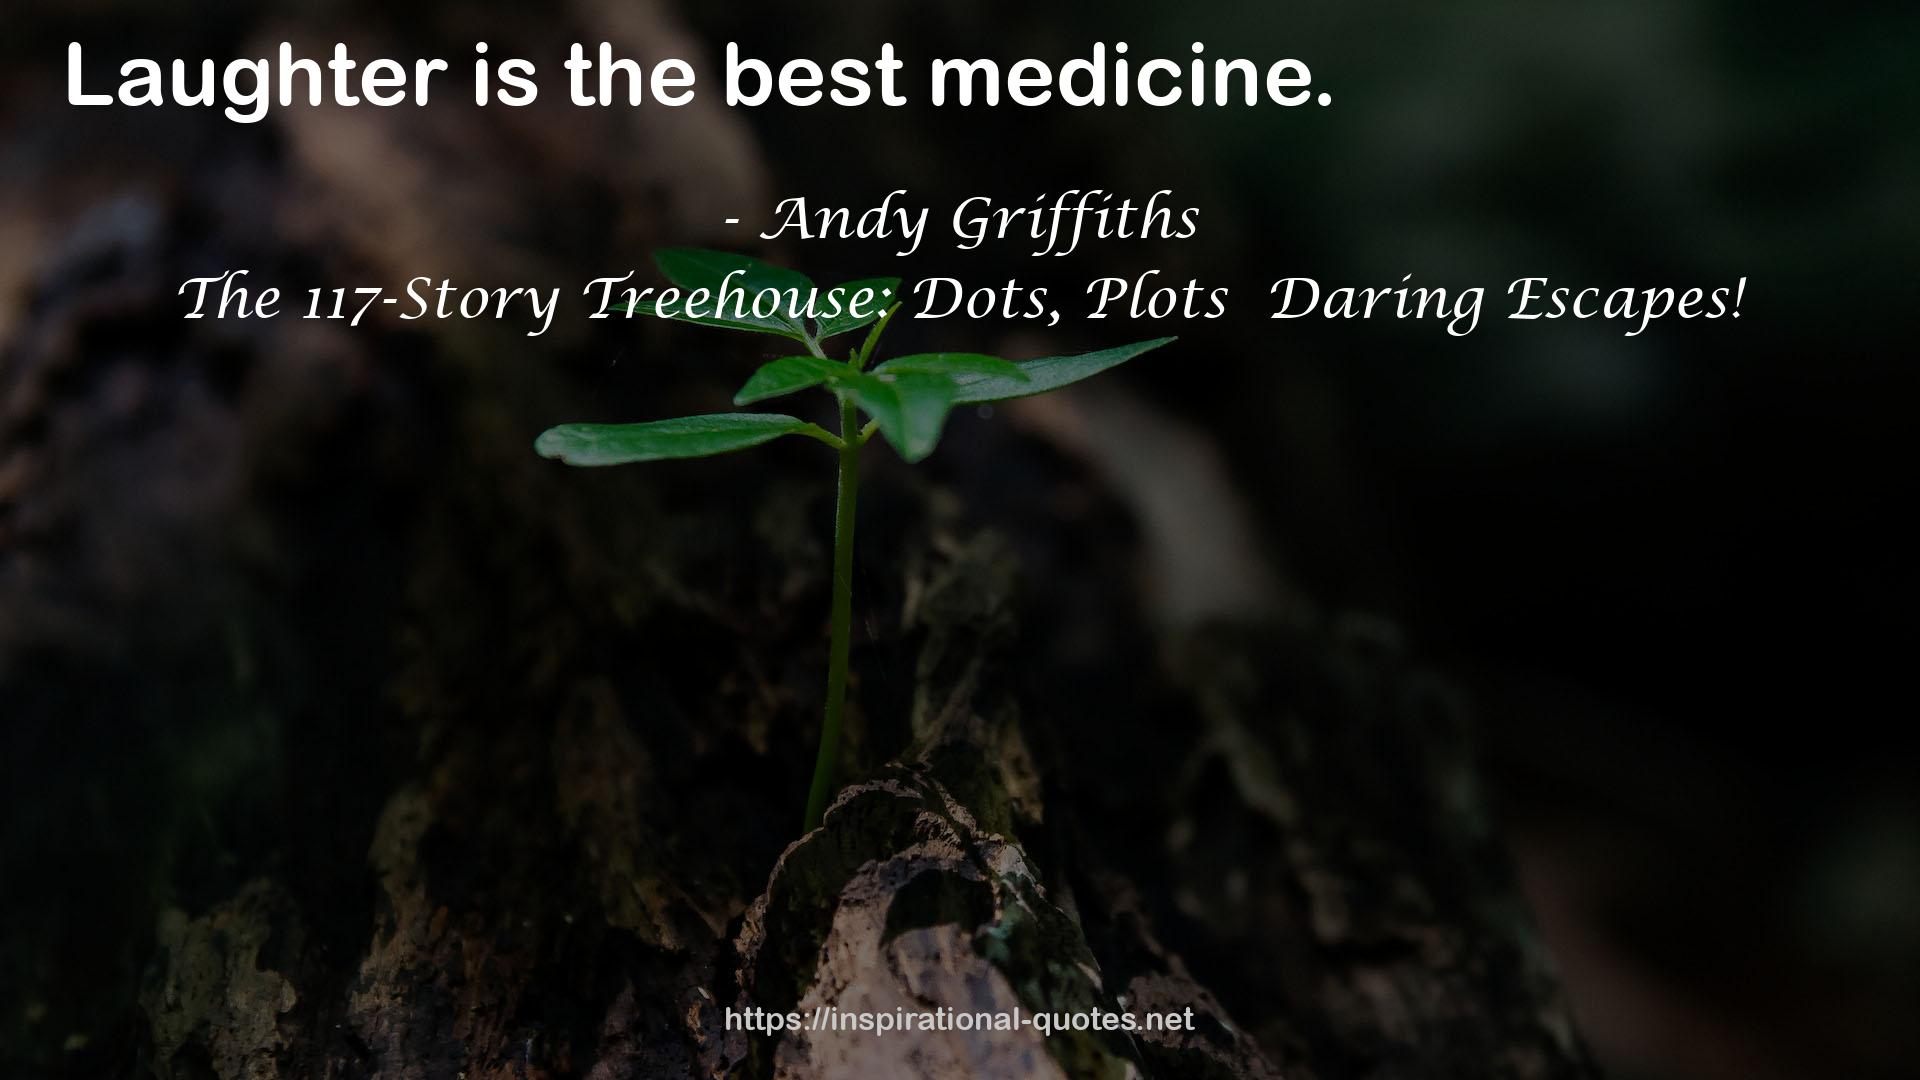 Andy Griffiths QUOTES